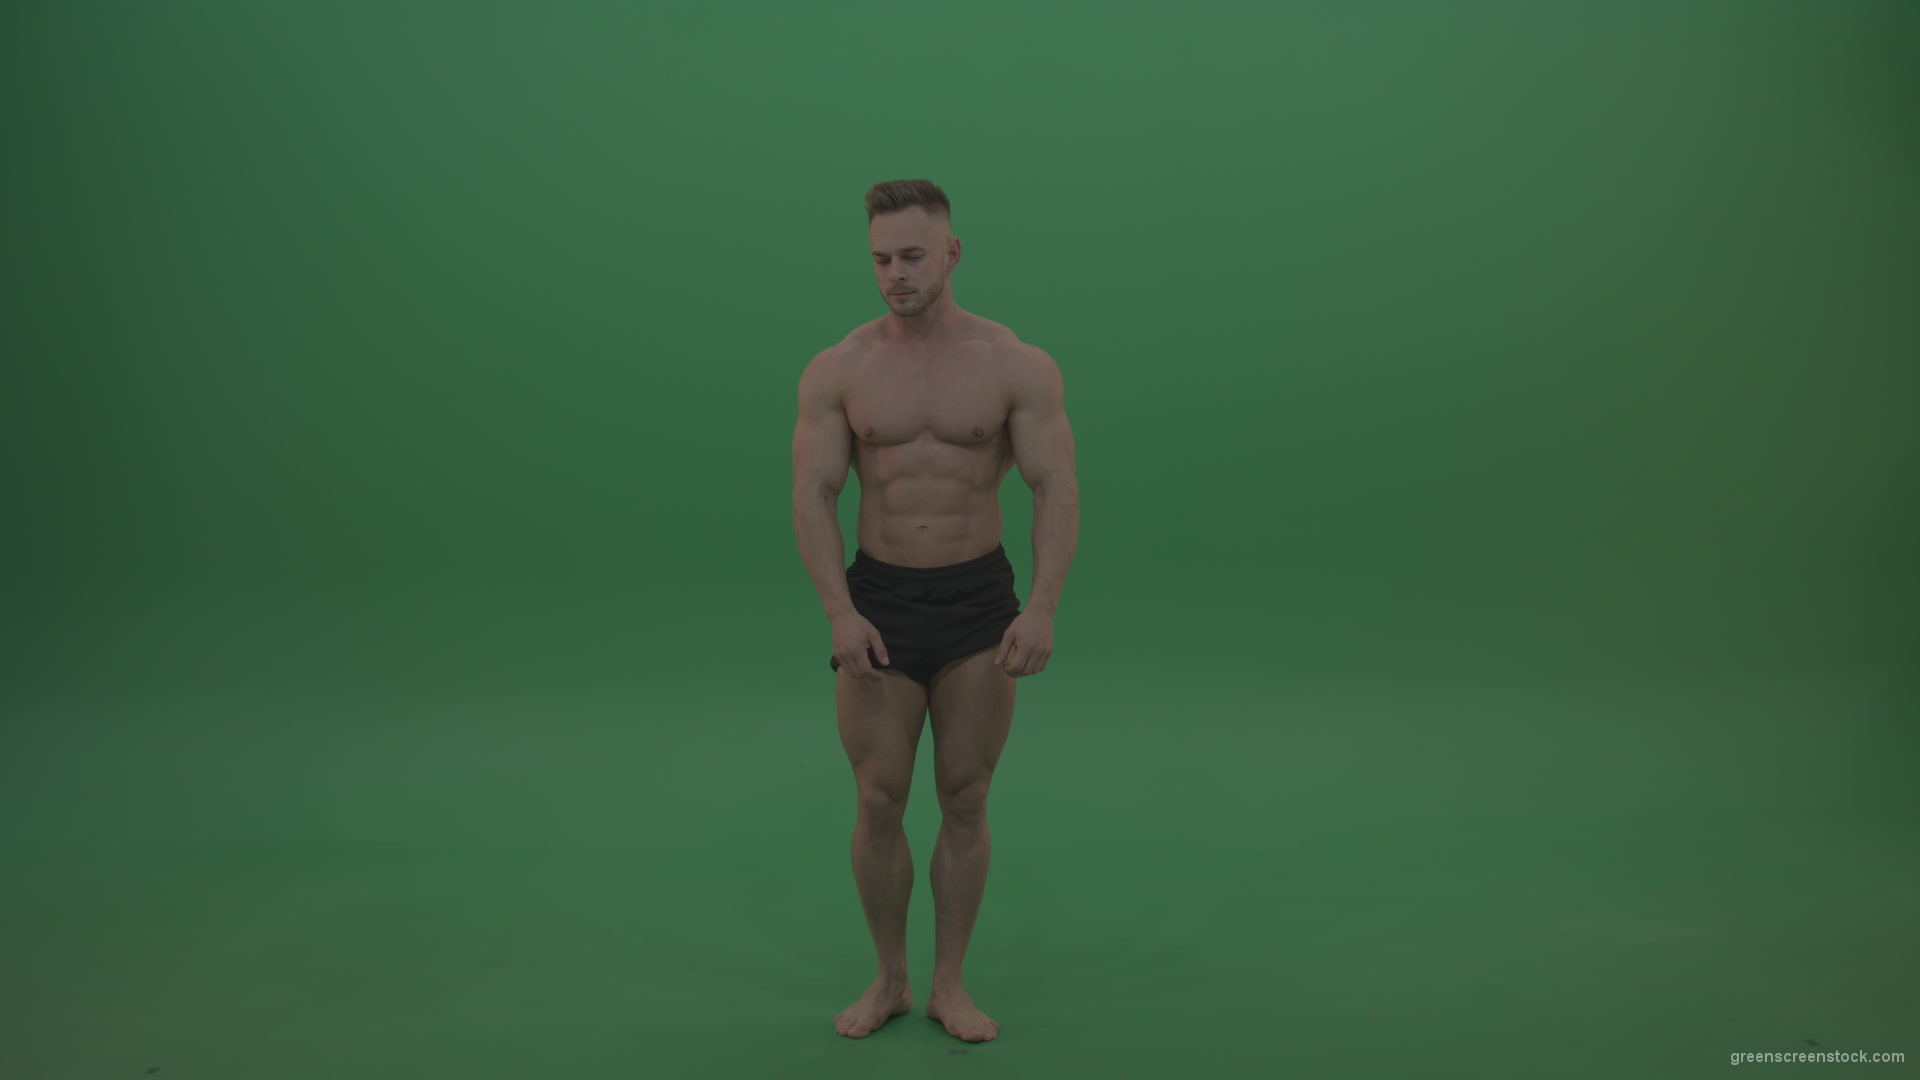 Young_Sportsman_Showing_Front_Double_Biceps_And_Thigh_Muscles_Bodybuilding_Positions_On_Gren_Screen_Wall_Background_001 Green Screen Stock